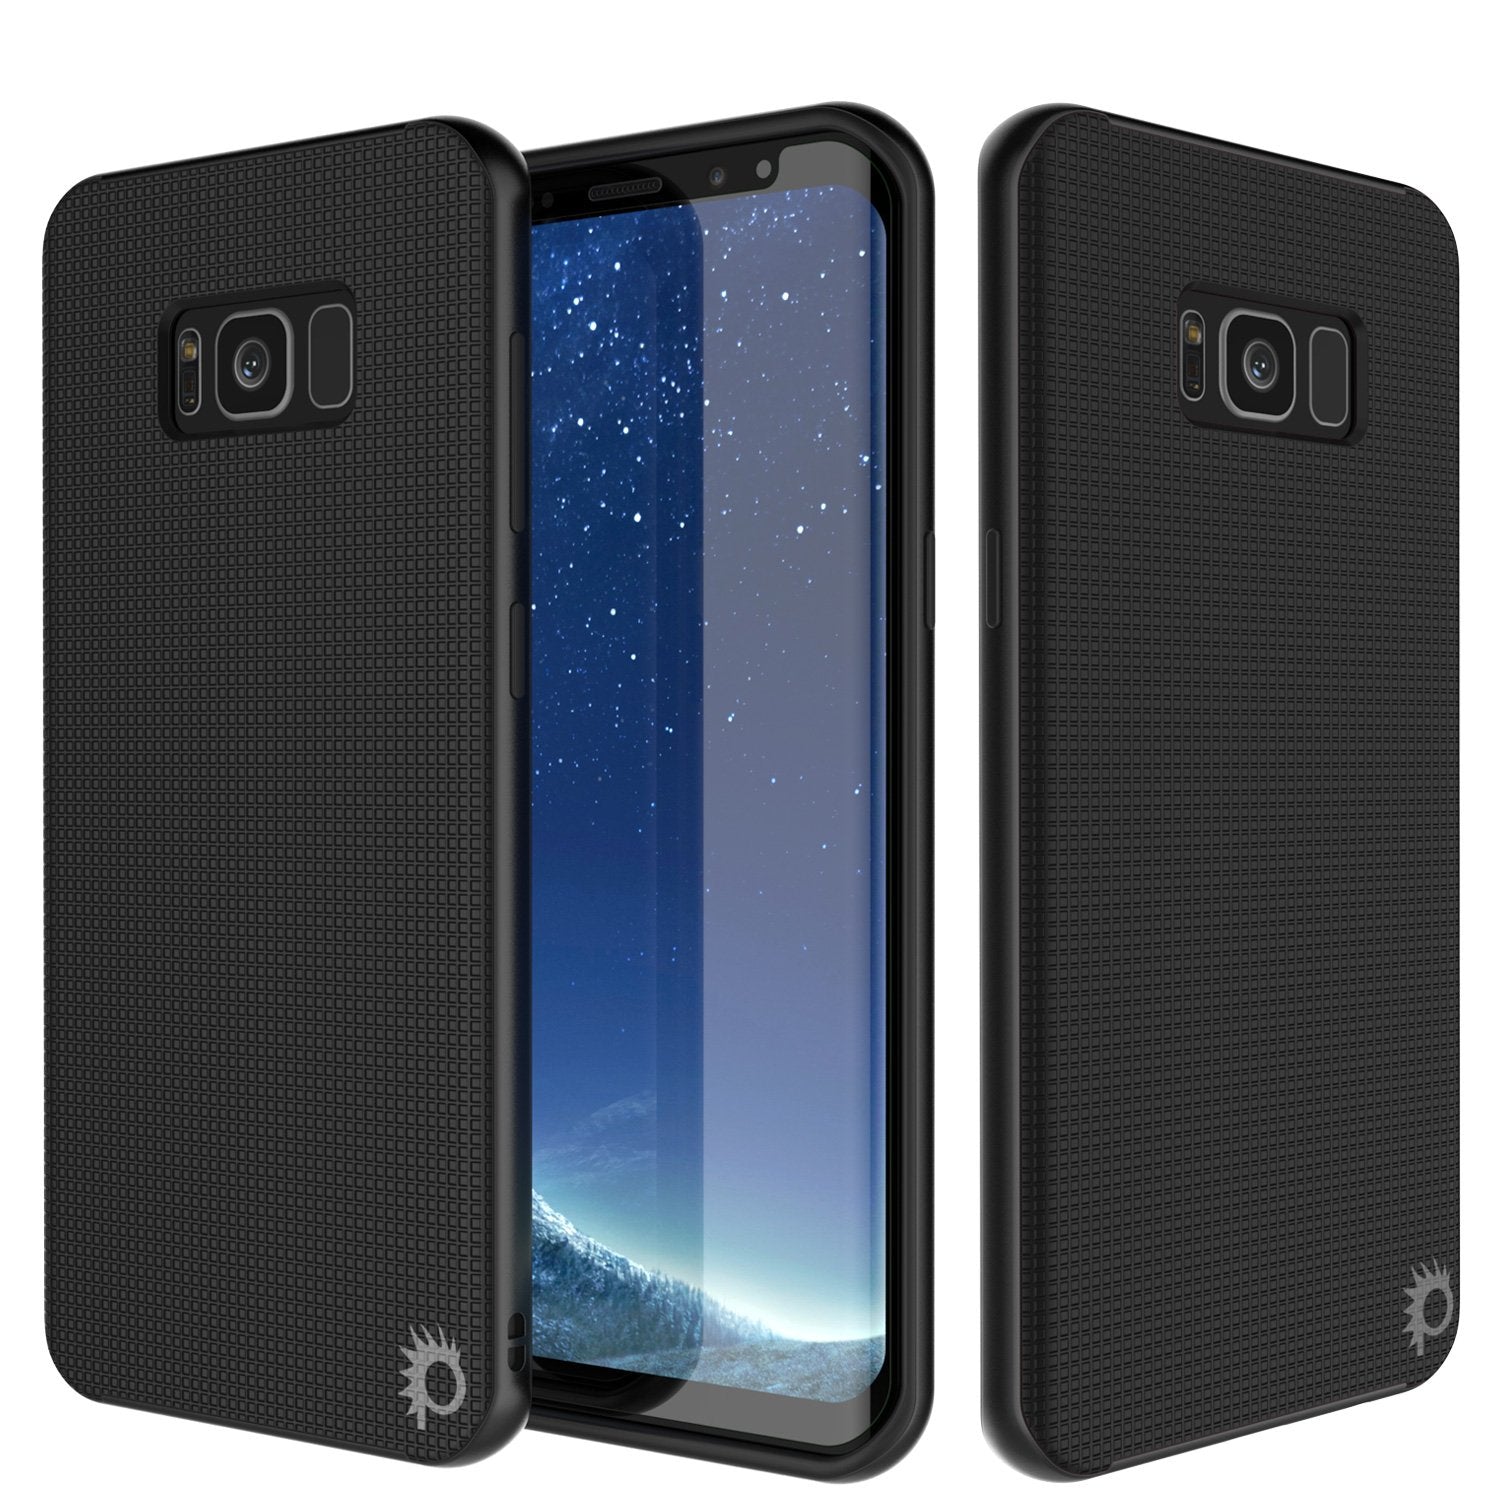 Galaxy S8 Case, PunkCase [Stealth Series] Hybrid 3-Piece Shockproof Dual Layer Cover [Non-Slip] [Soft TPU + PC Bumper] with PUNKSHIELD Screen Protector for Samsung S8 Edge [Black] - PunkCase NZ